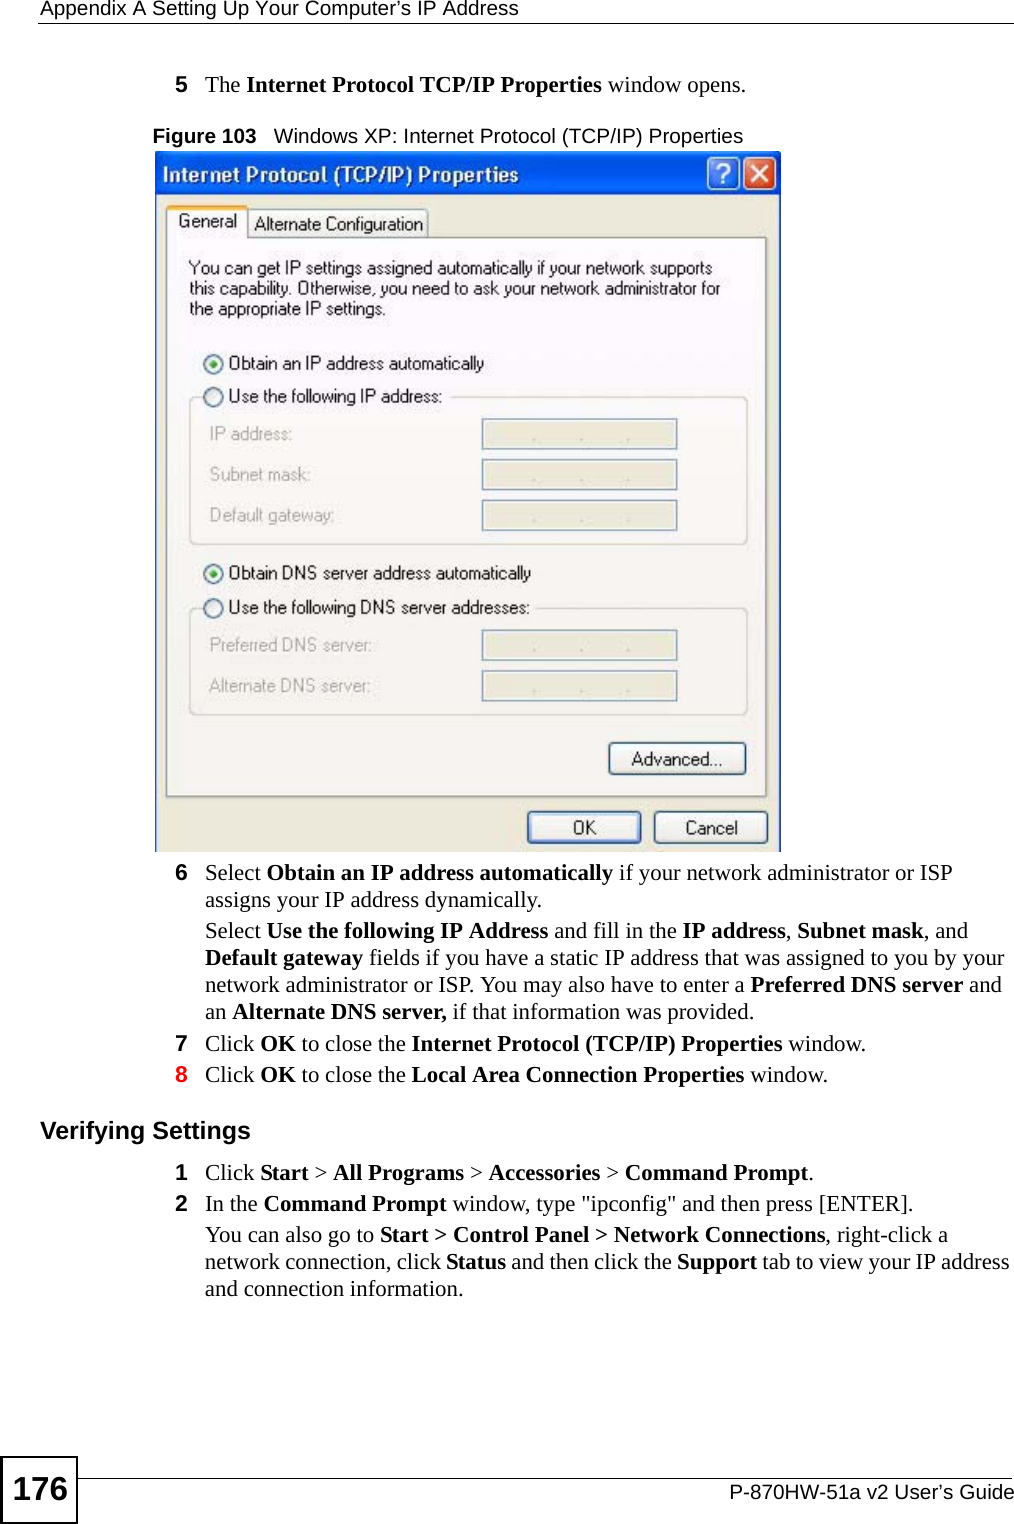 Appendix A Setting Up Your Computer’s IP AddressP-870HW-51a v2 User’s Guide1765The Internet Protocol TCP/IP Properties window opens.Figure 103   Windows XP: Internet Protocol (TCP/IP) Properties6Select Obtain an IP address automatically if your network administrator or ISP assigns your IP address dynamically.Select Use the following IP Address and fill in the IP address, Subnet mask, and Default gateway fields if you have a static IP address that was assigned to you by your network administrator or ISP. You may also have to enter a Preferred DNS server and an Alternate DNS server, if that information was provided.7Click OK to close the Internet Protocol (TCP/IP) Properties window.8Click OK to close the Local Area Connection Properties window.Verifying Settings1Click Start &gt; All Programs &gt; Accessories &gt; Command Prompt.2In the Command Prompt window, type &quot;ipconfig&quot; and then press [ENTER]. You can also go to Start &gt; Control Panel &gt; Network Connections, right-click a network connection, click Status and then click the Support tab to view your IP address and connection information.